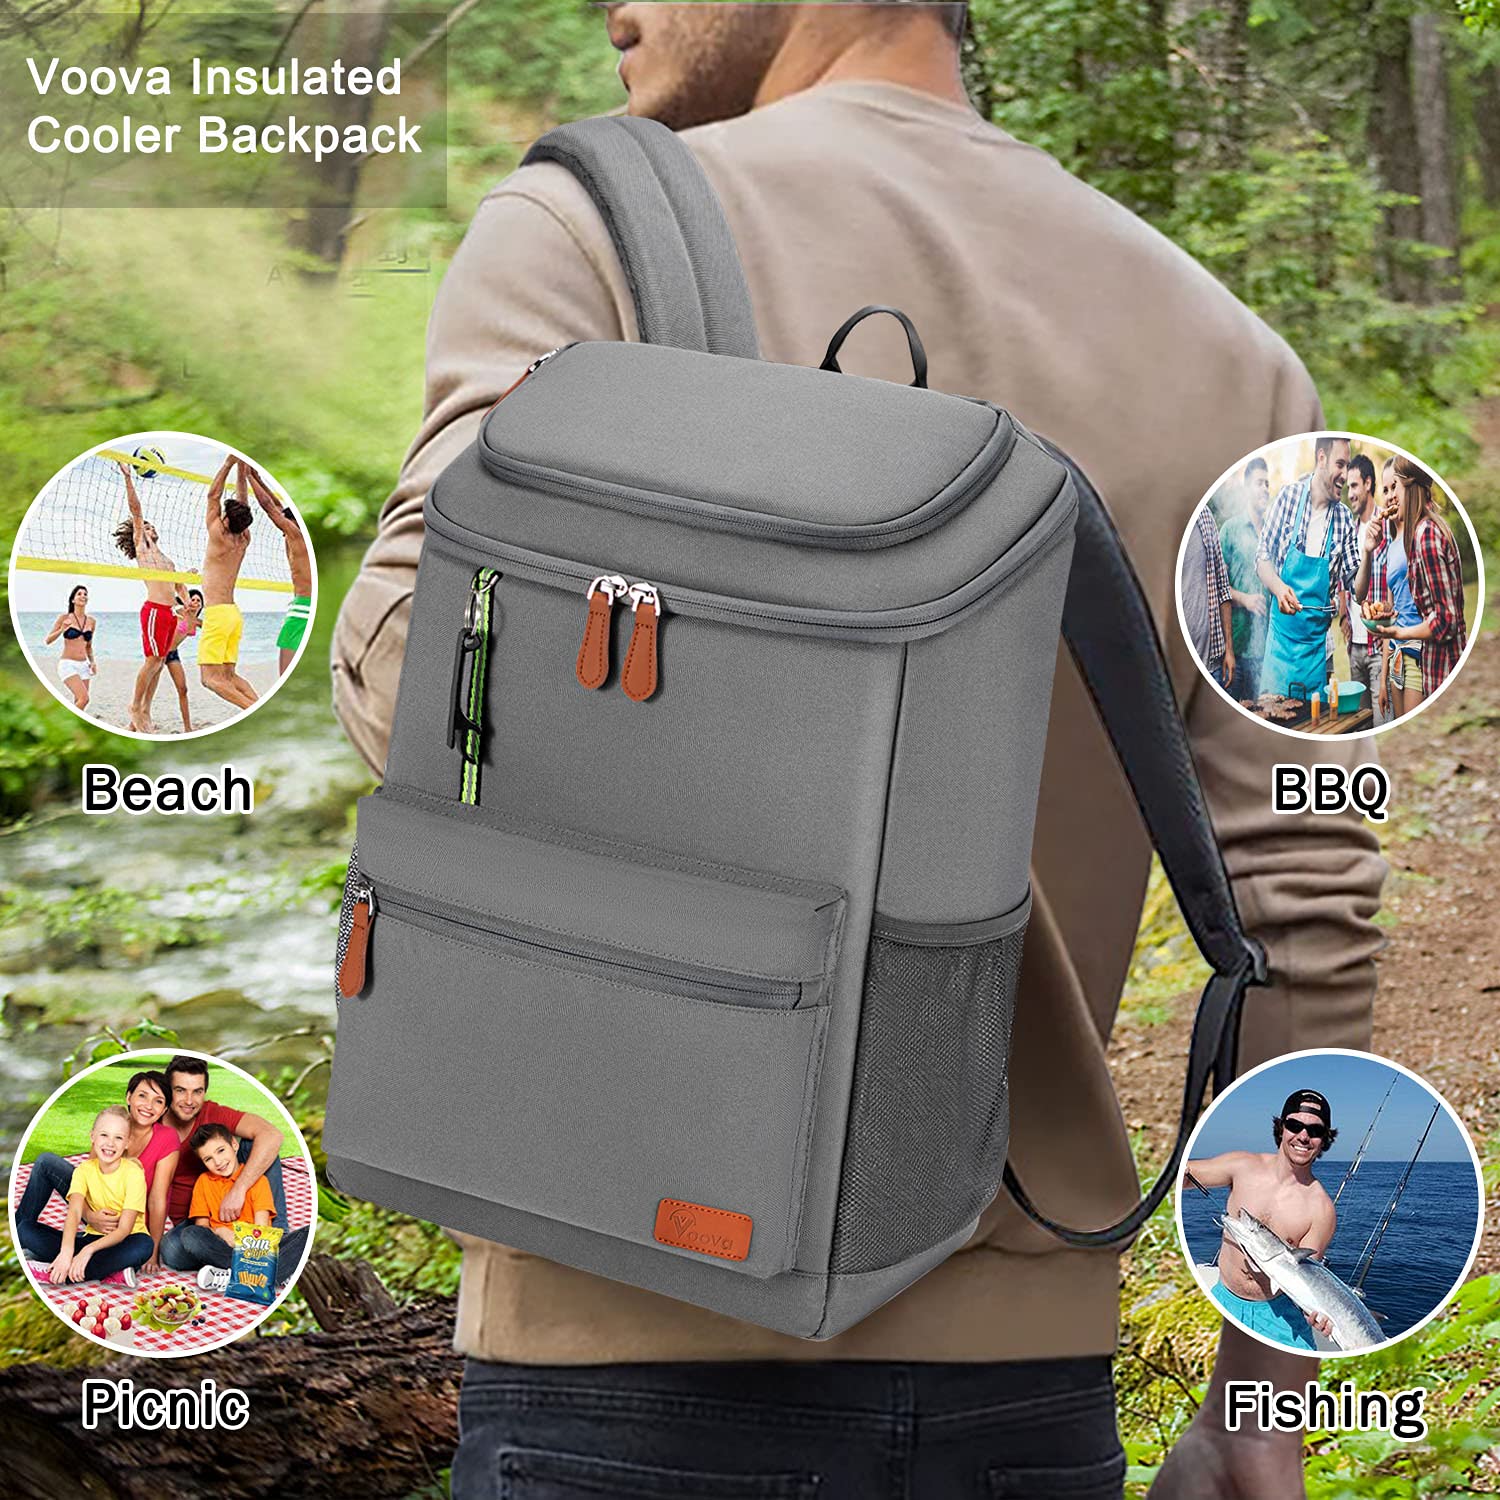 Voova Backpack Cooler Insulated Waterproof Leakproof Cooler Back Pack, Portable Soft Sided Coolers Bookbag for Men Women to Beach Lunch Picnic Camping Hiking Fishing Travel Trips, 30 Cans